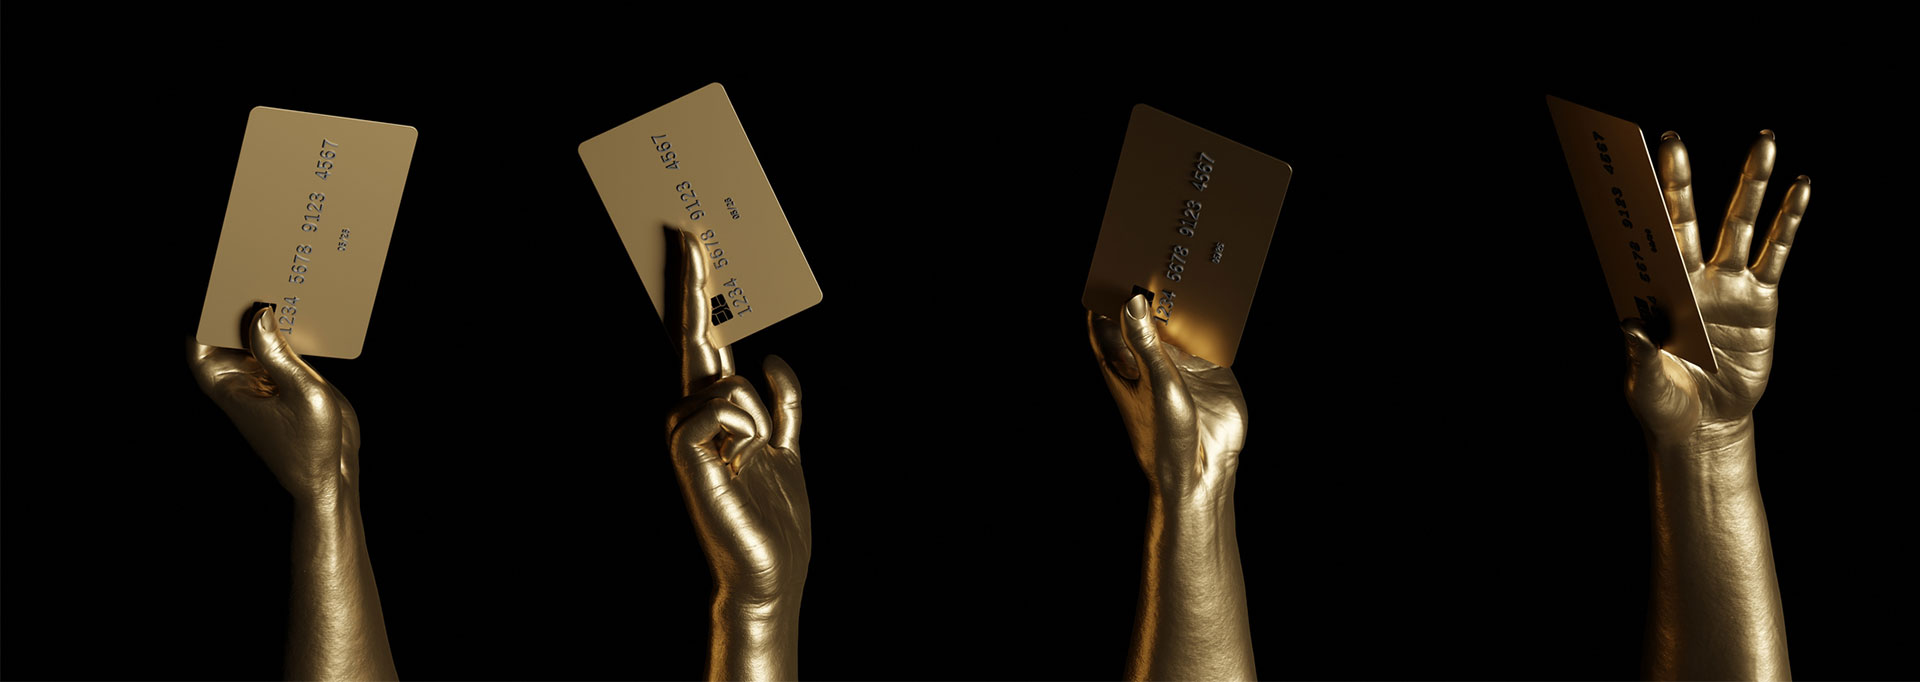 gold credit cards in gold hands